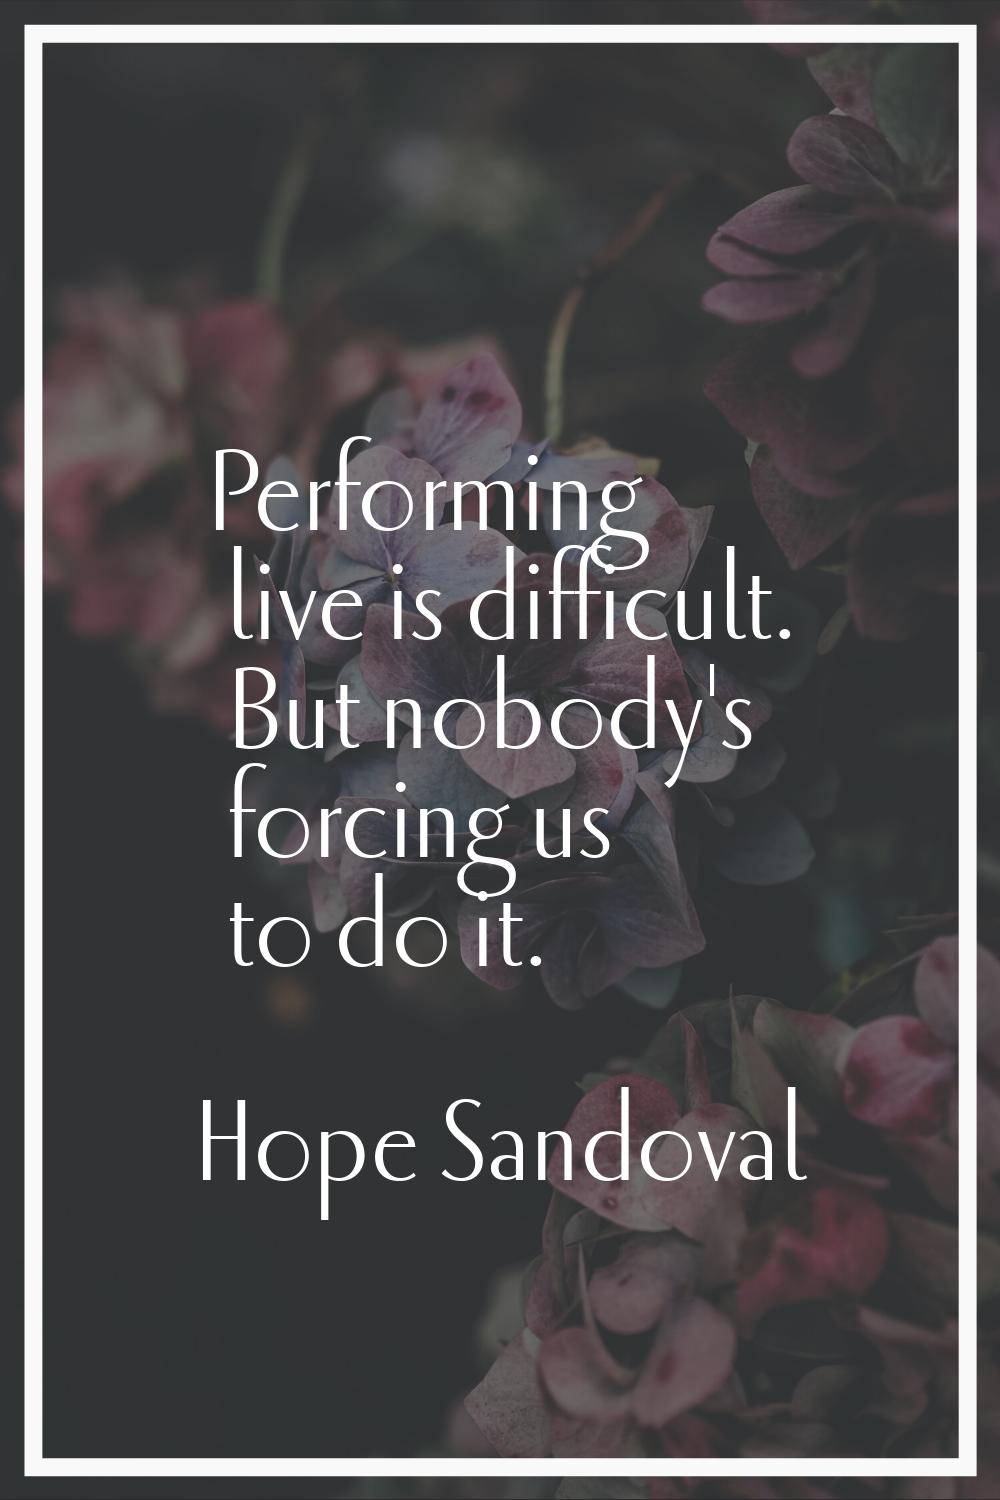 Performing live is difficult. But nobody's forcing us to do it.